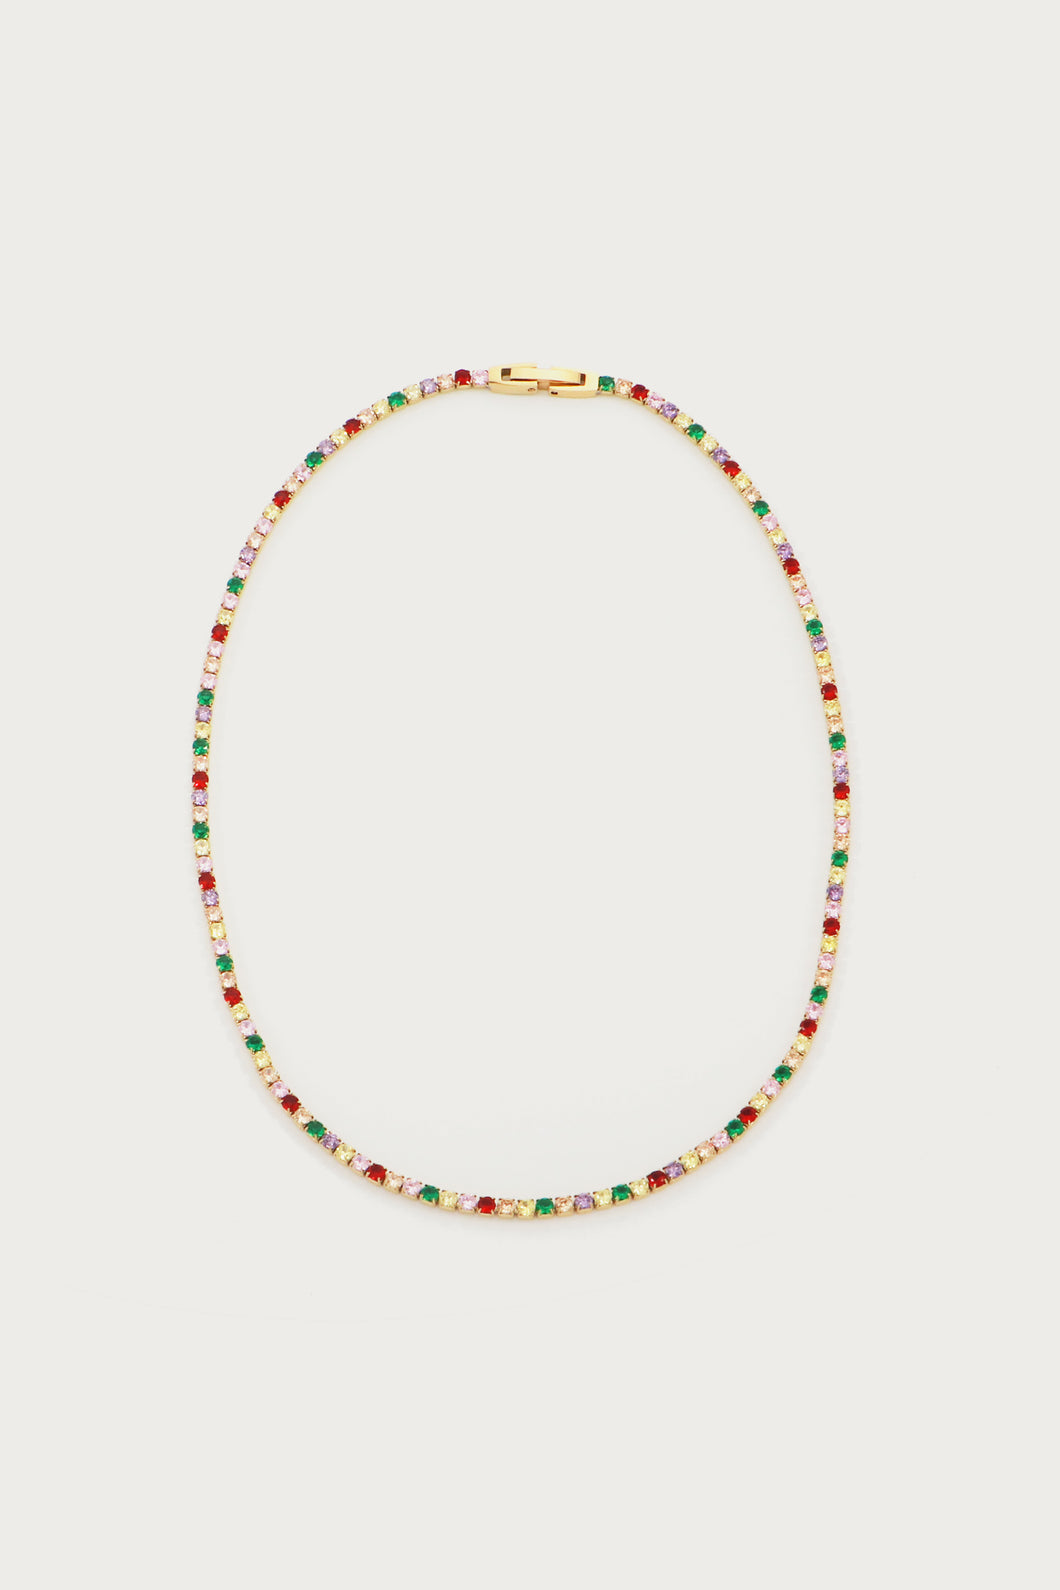 Introducing our stunning Rainbow Tennis Necklace – a dazzling fusion of vibrant hues that will elevate your style to new heights. This eye-catching necklace features a carefully curated selection of multicolored stones, each intricately set to create a mesmerizing rainbow effect. 